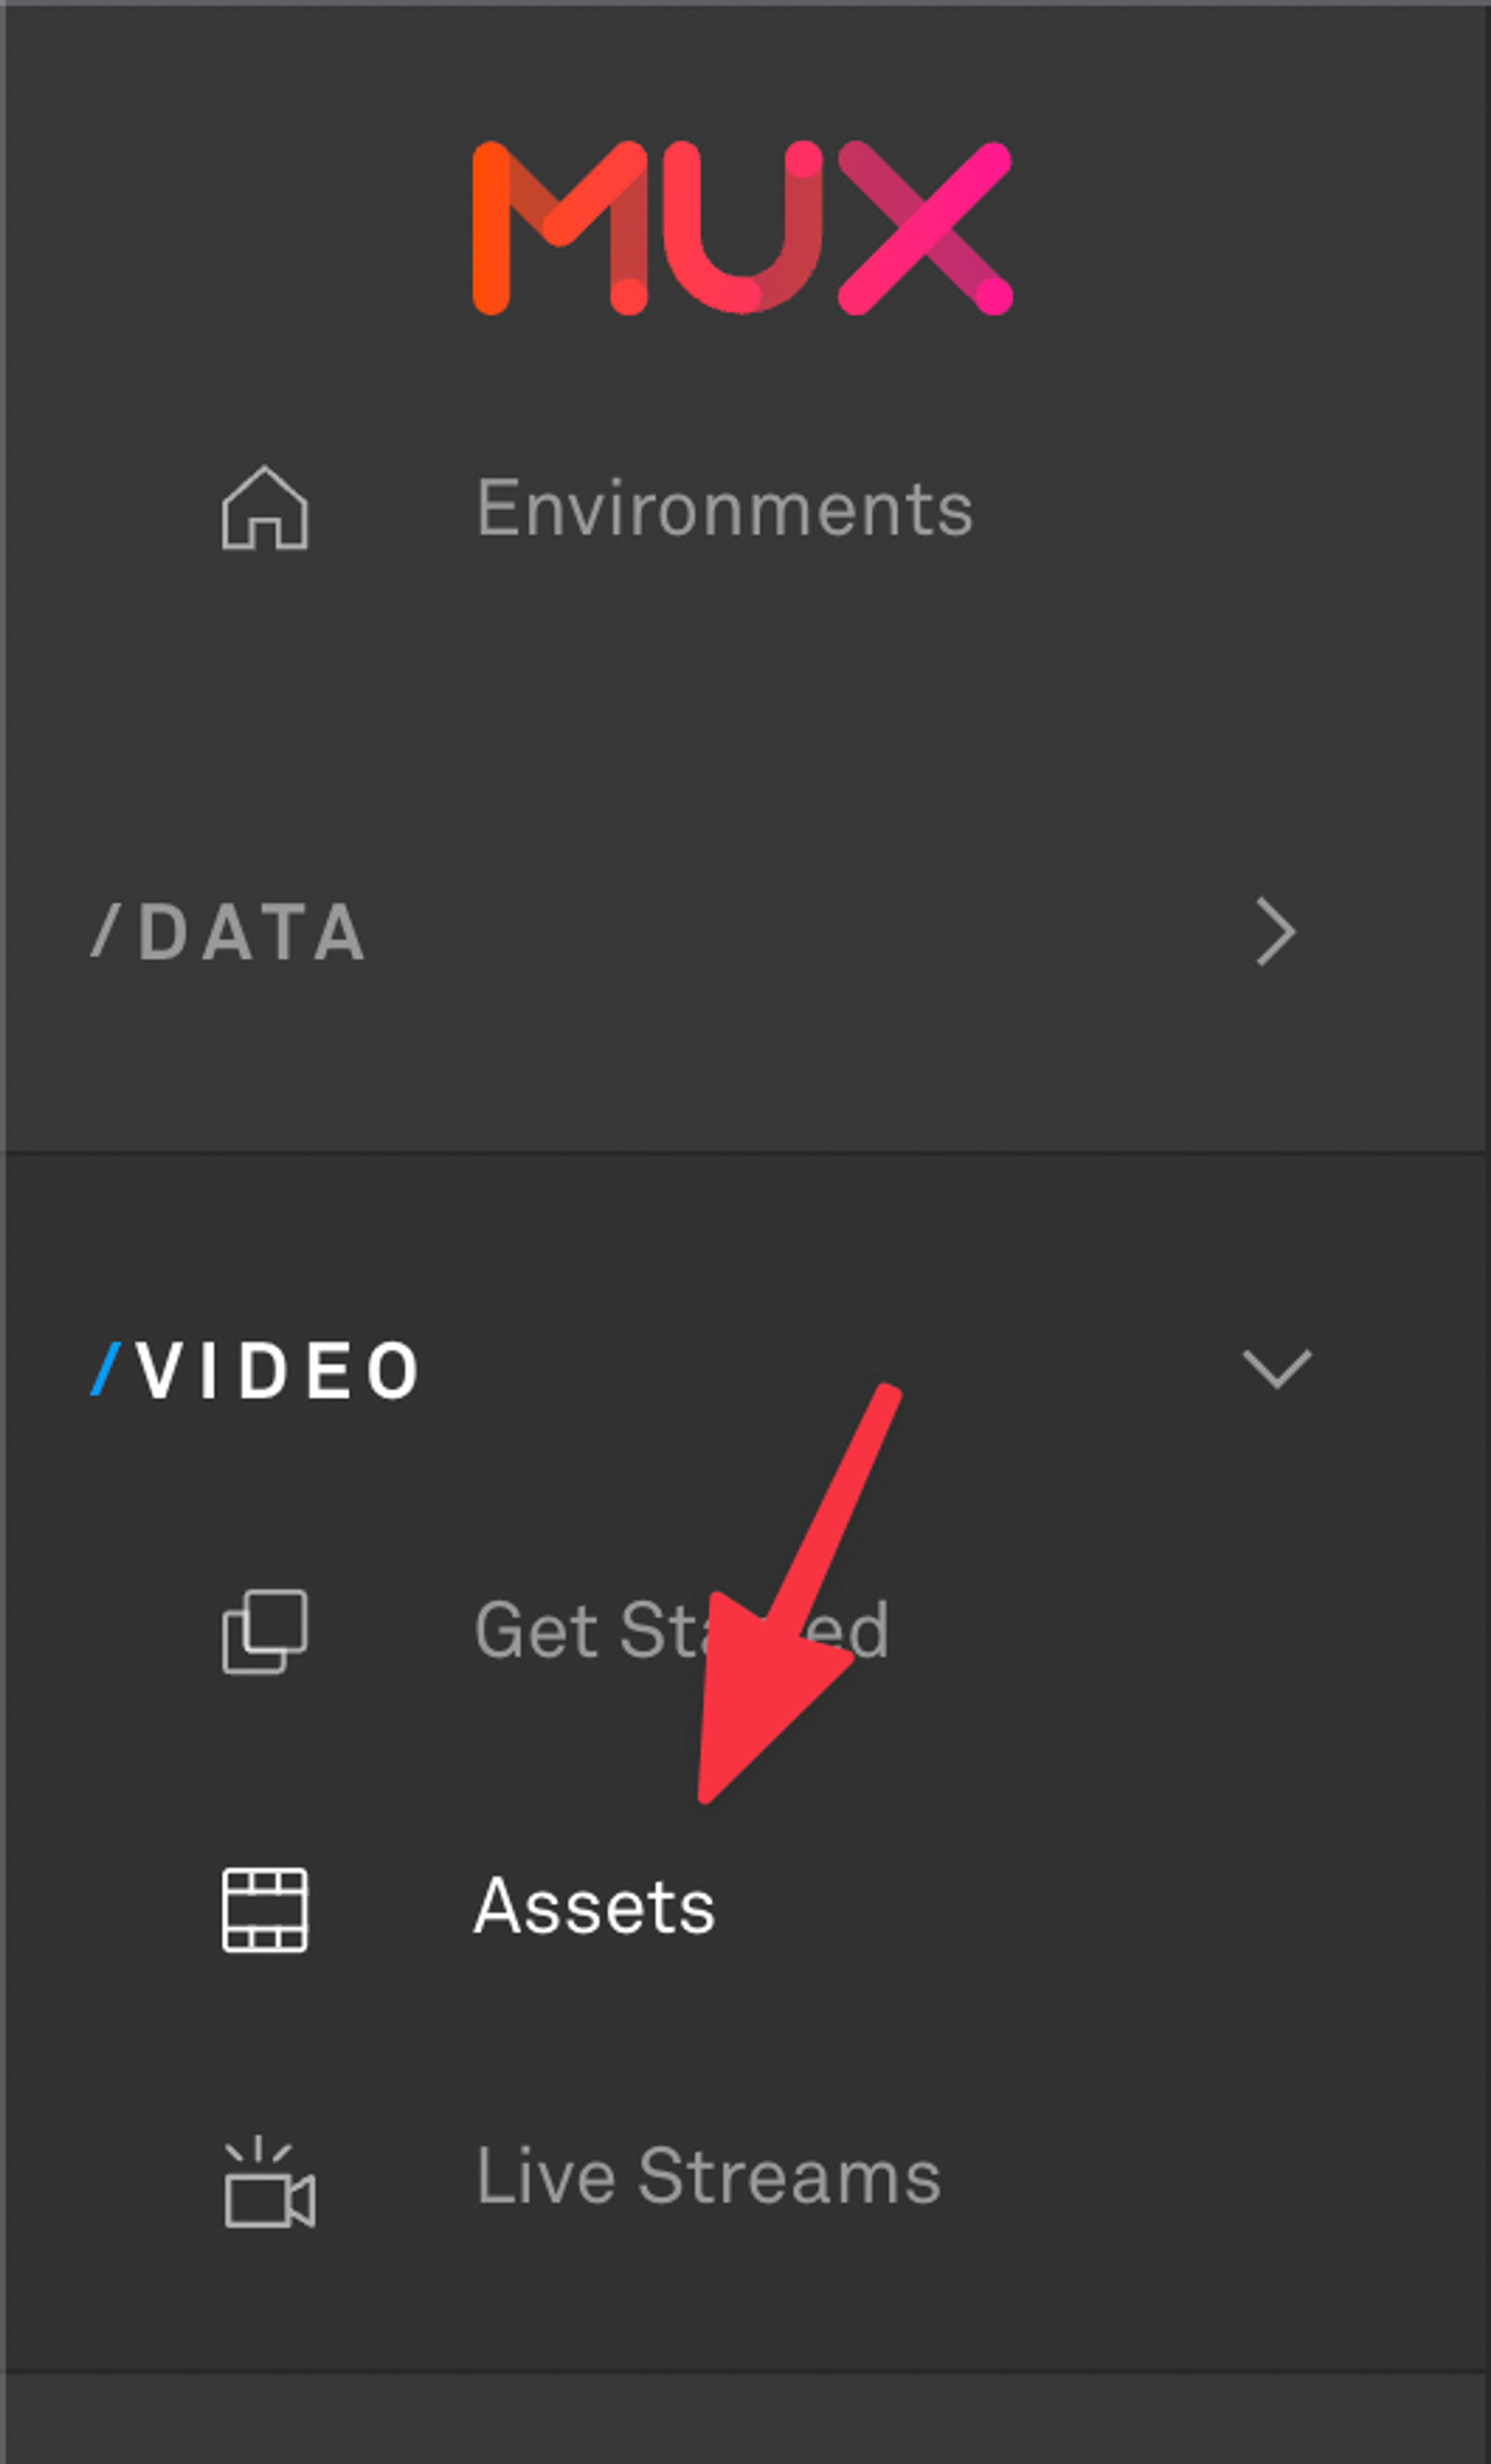 Screenshot of Mux Dashboard's left sidebar menu where a red arrow is pointing to a menu item under /video called "Assets".